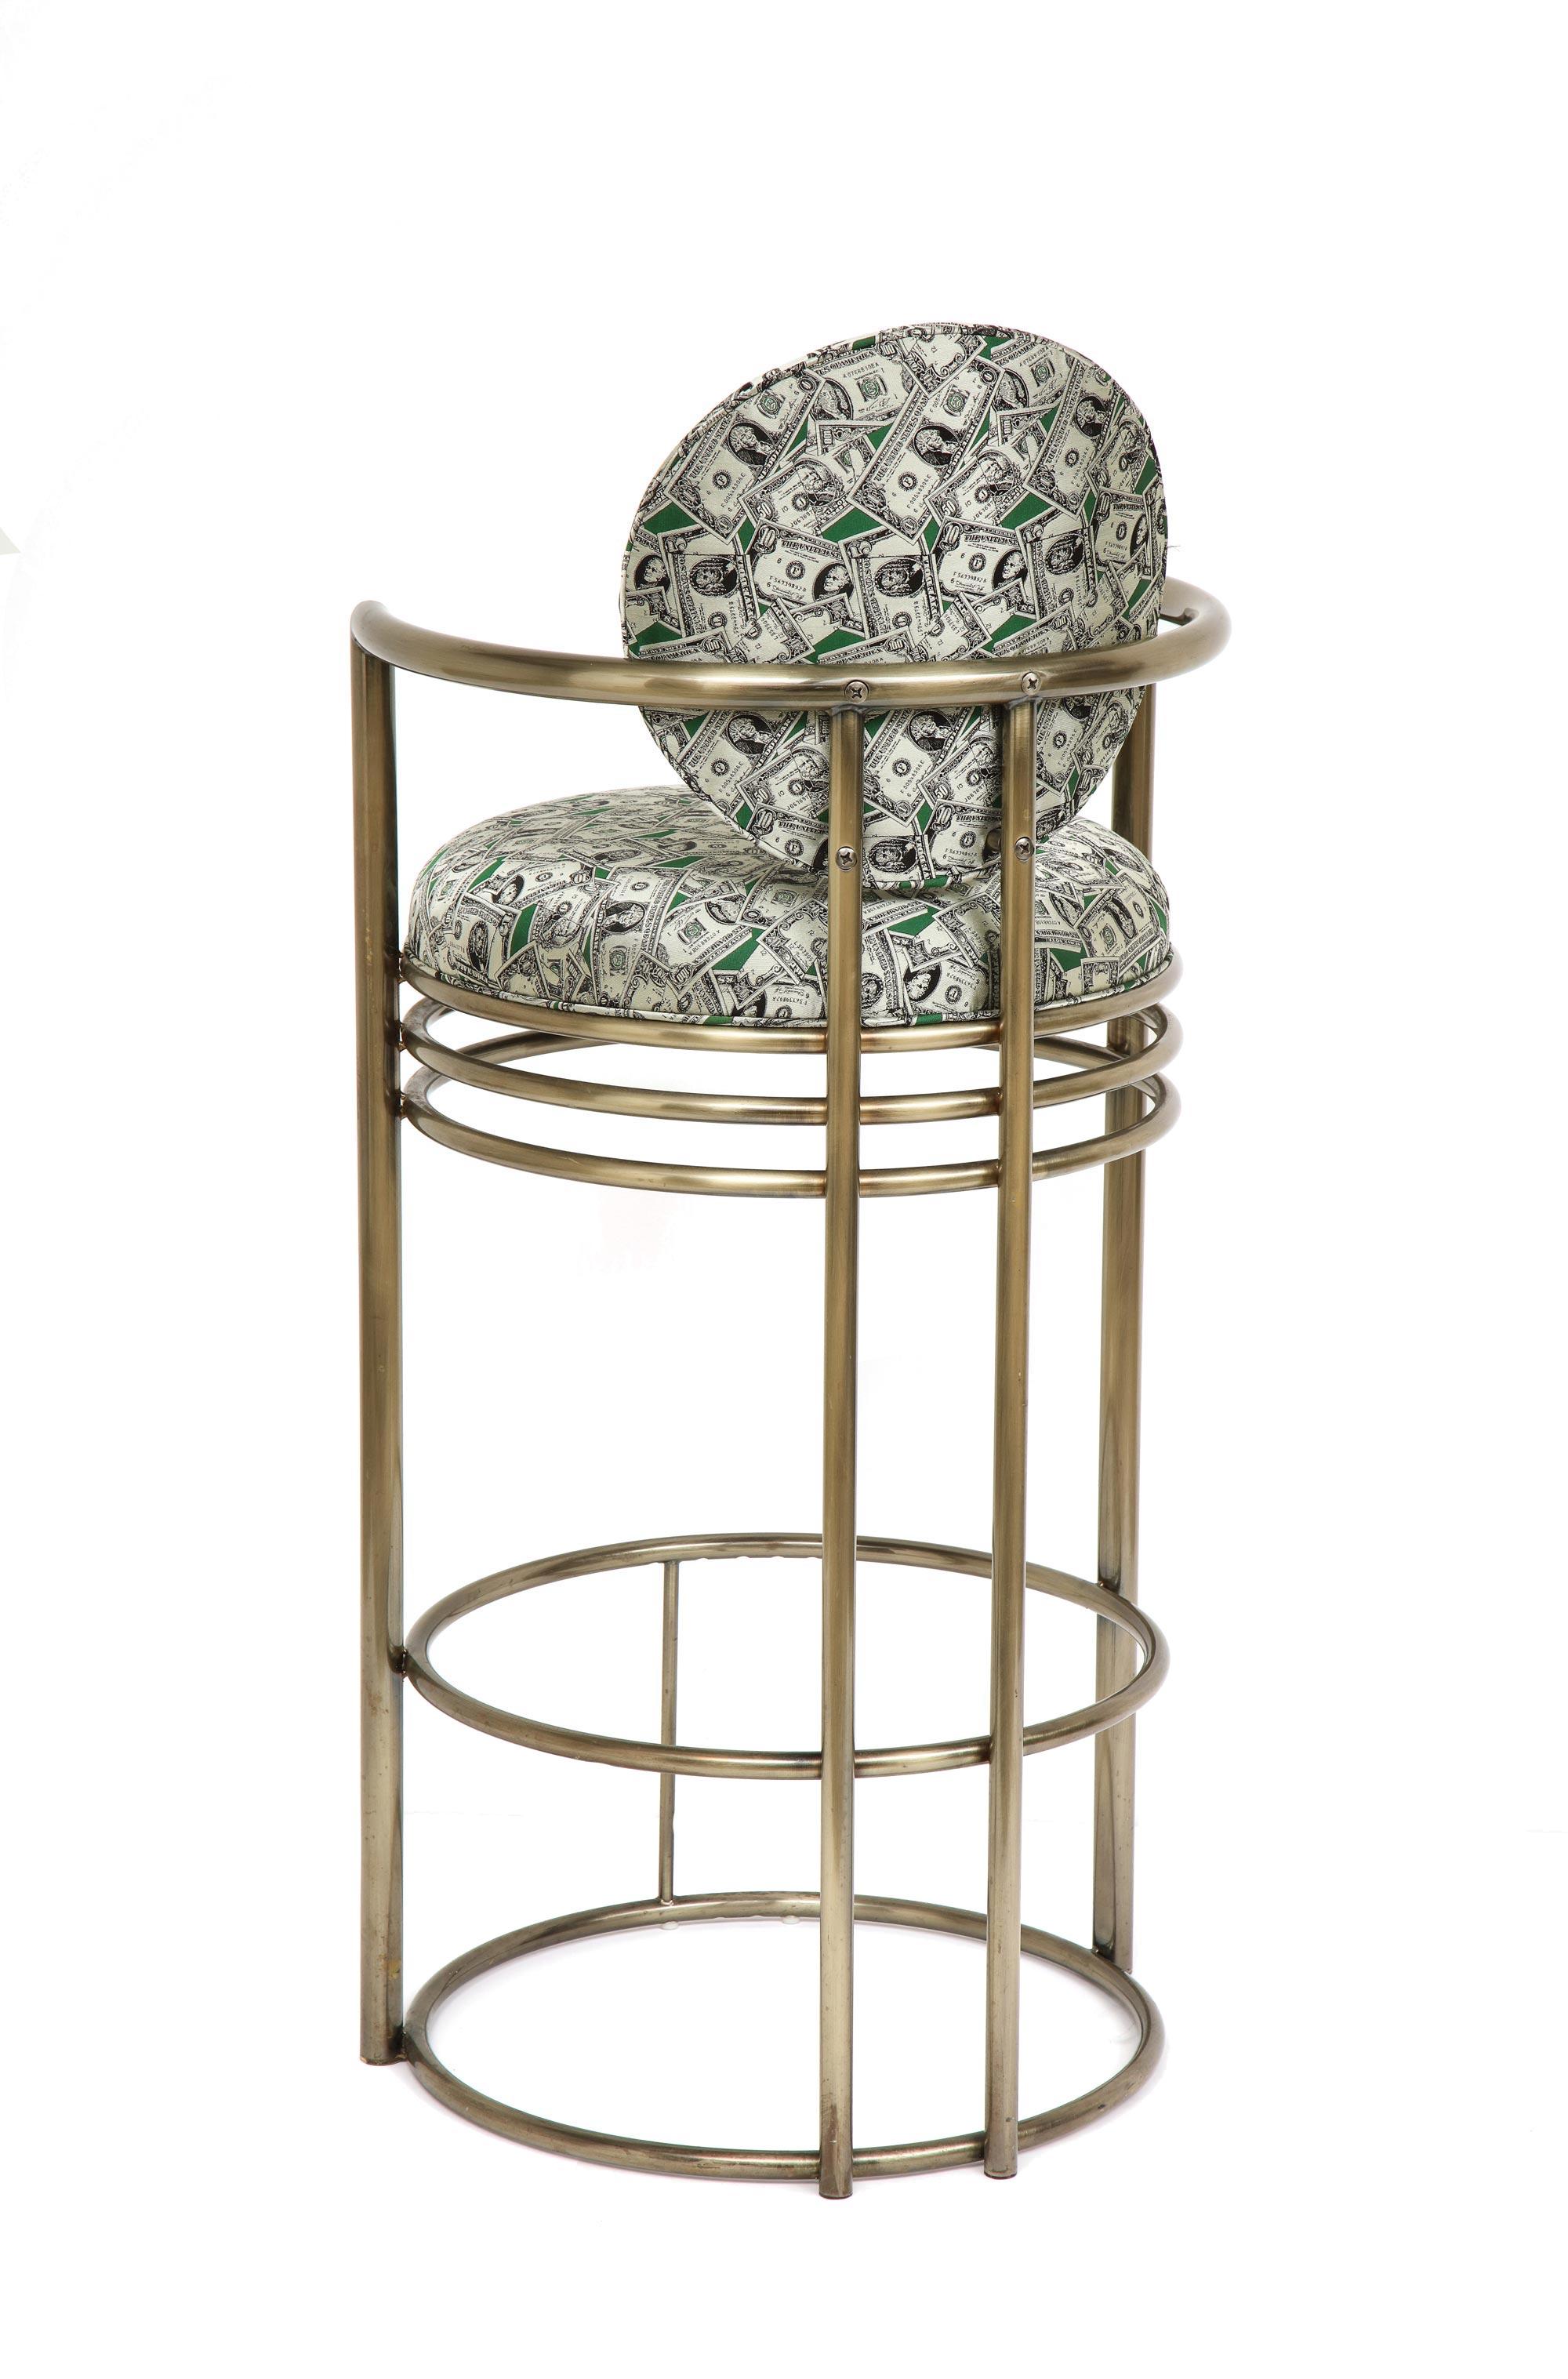 Money Bar Stools, Brass Bar Stools in Scalamandre Dollar Bill Fabric, Pair In Good Condition For Sale In New York, NY